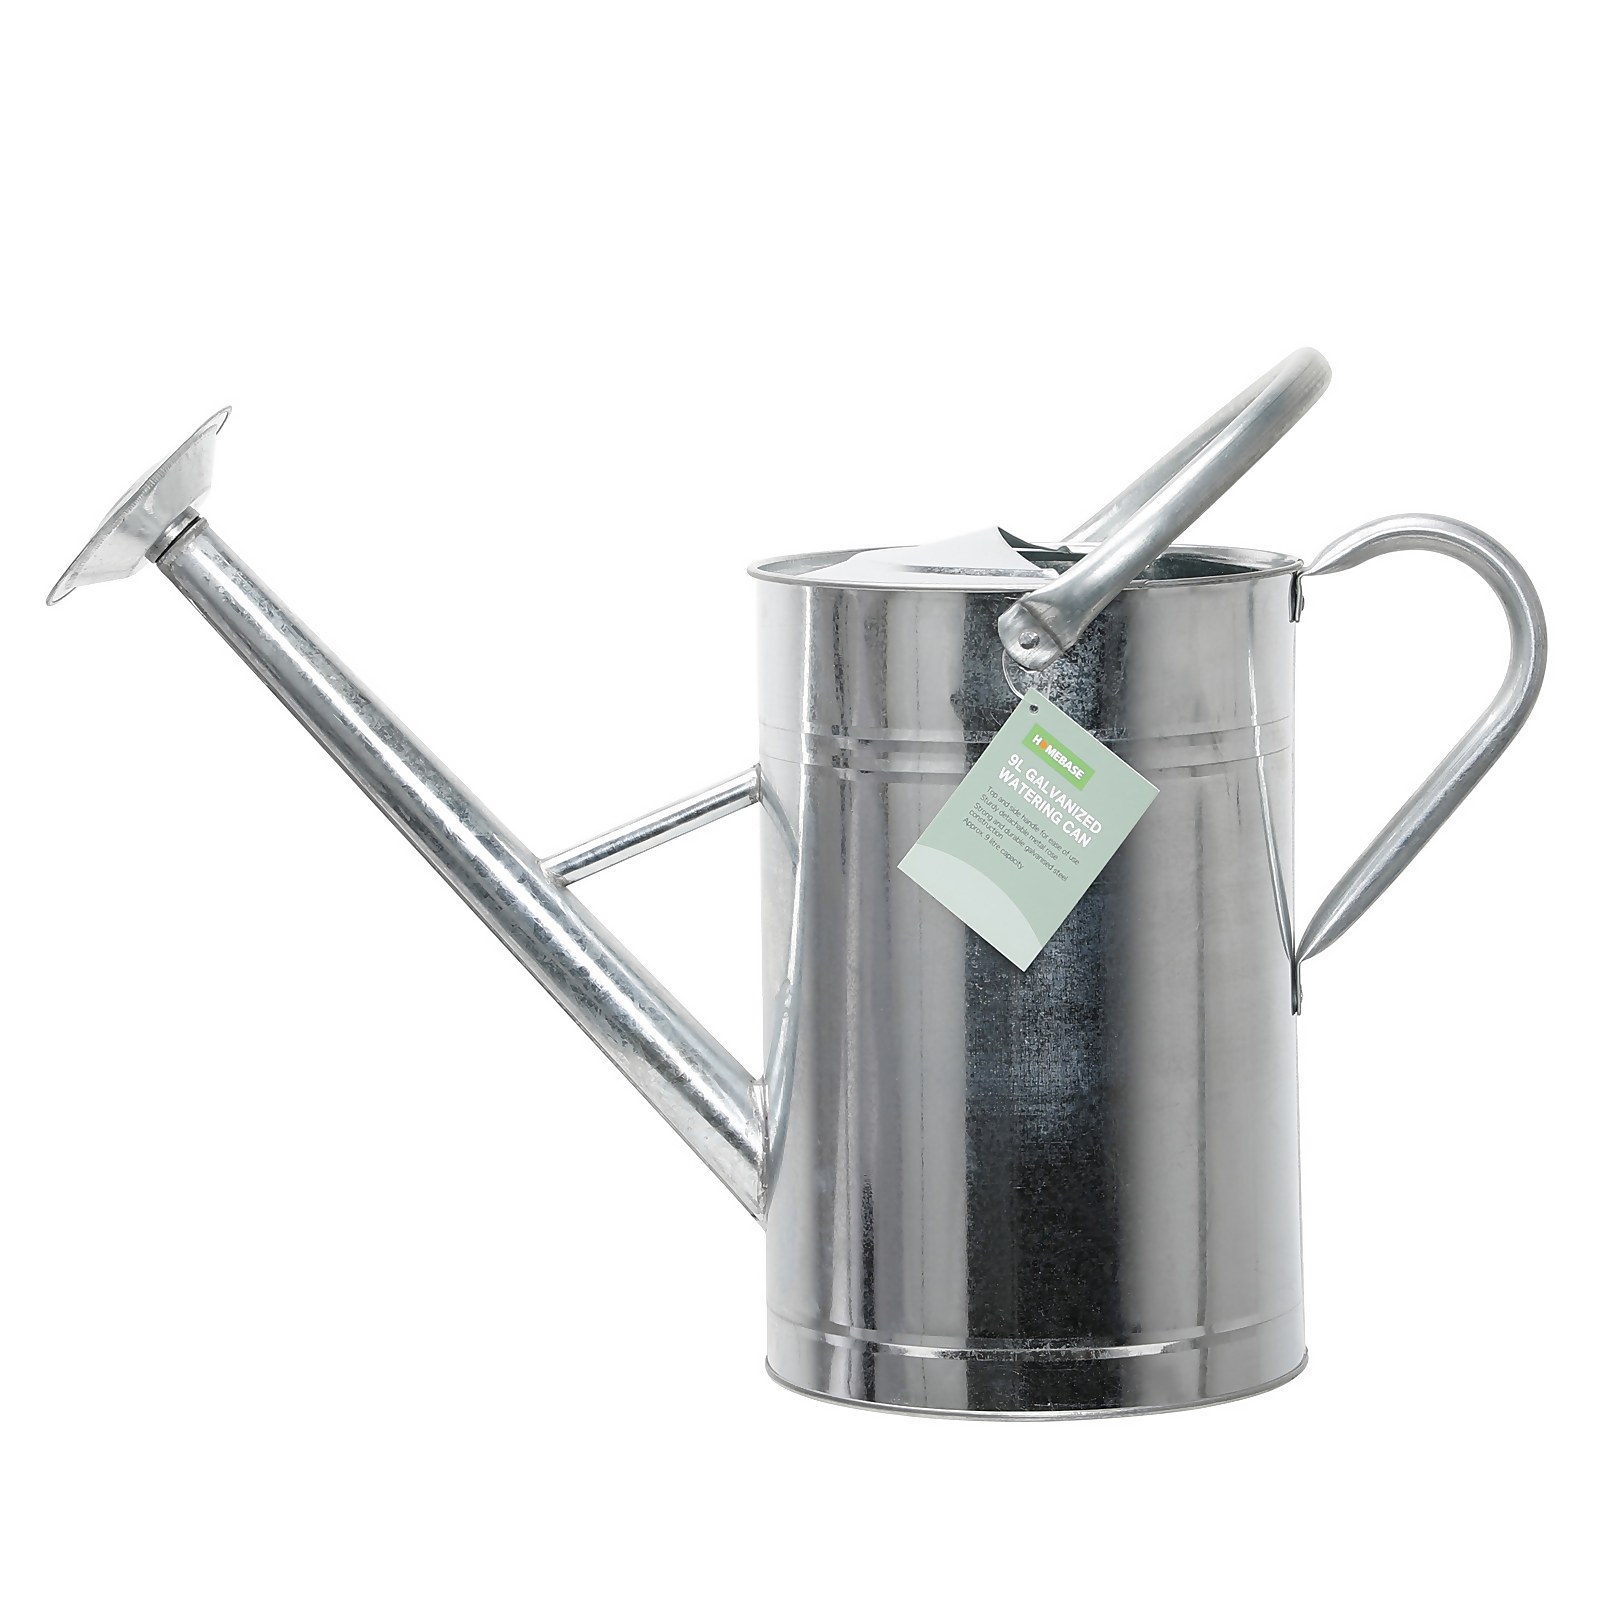 Photo of Hb Watering Can Galvanized - 9l